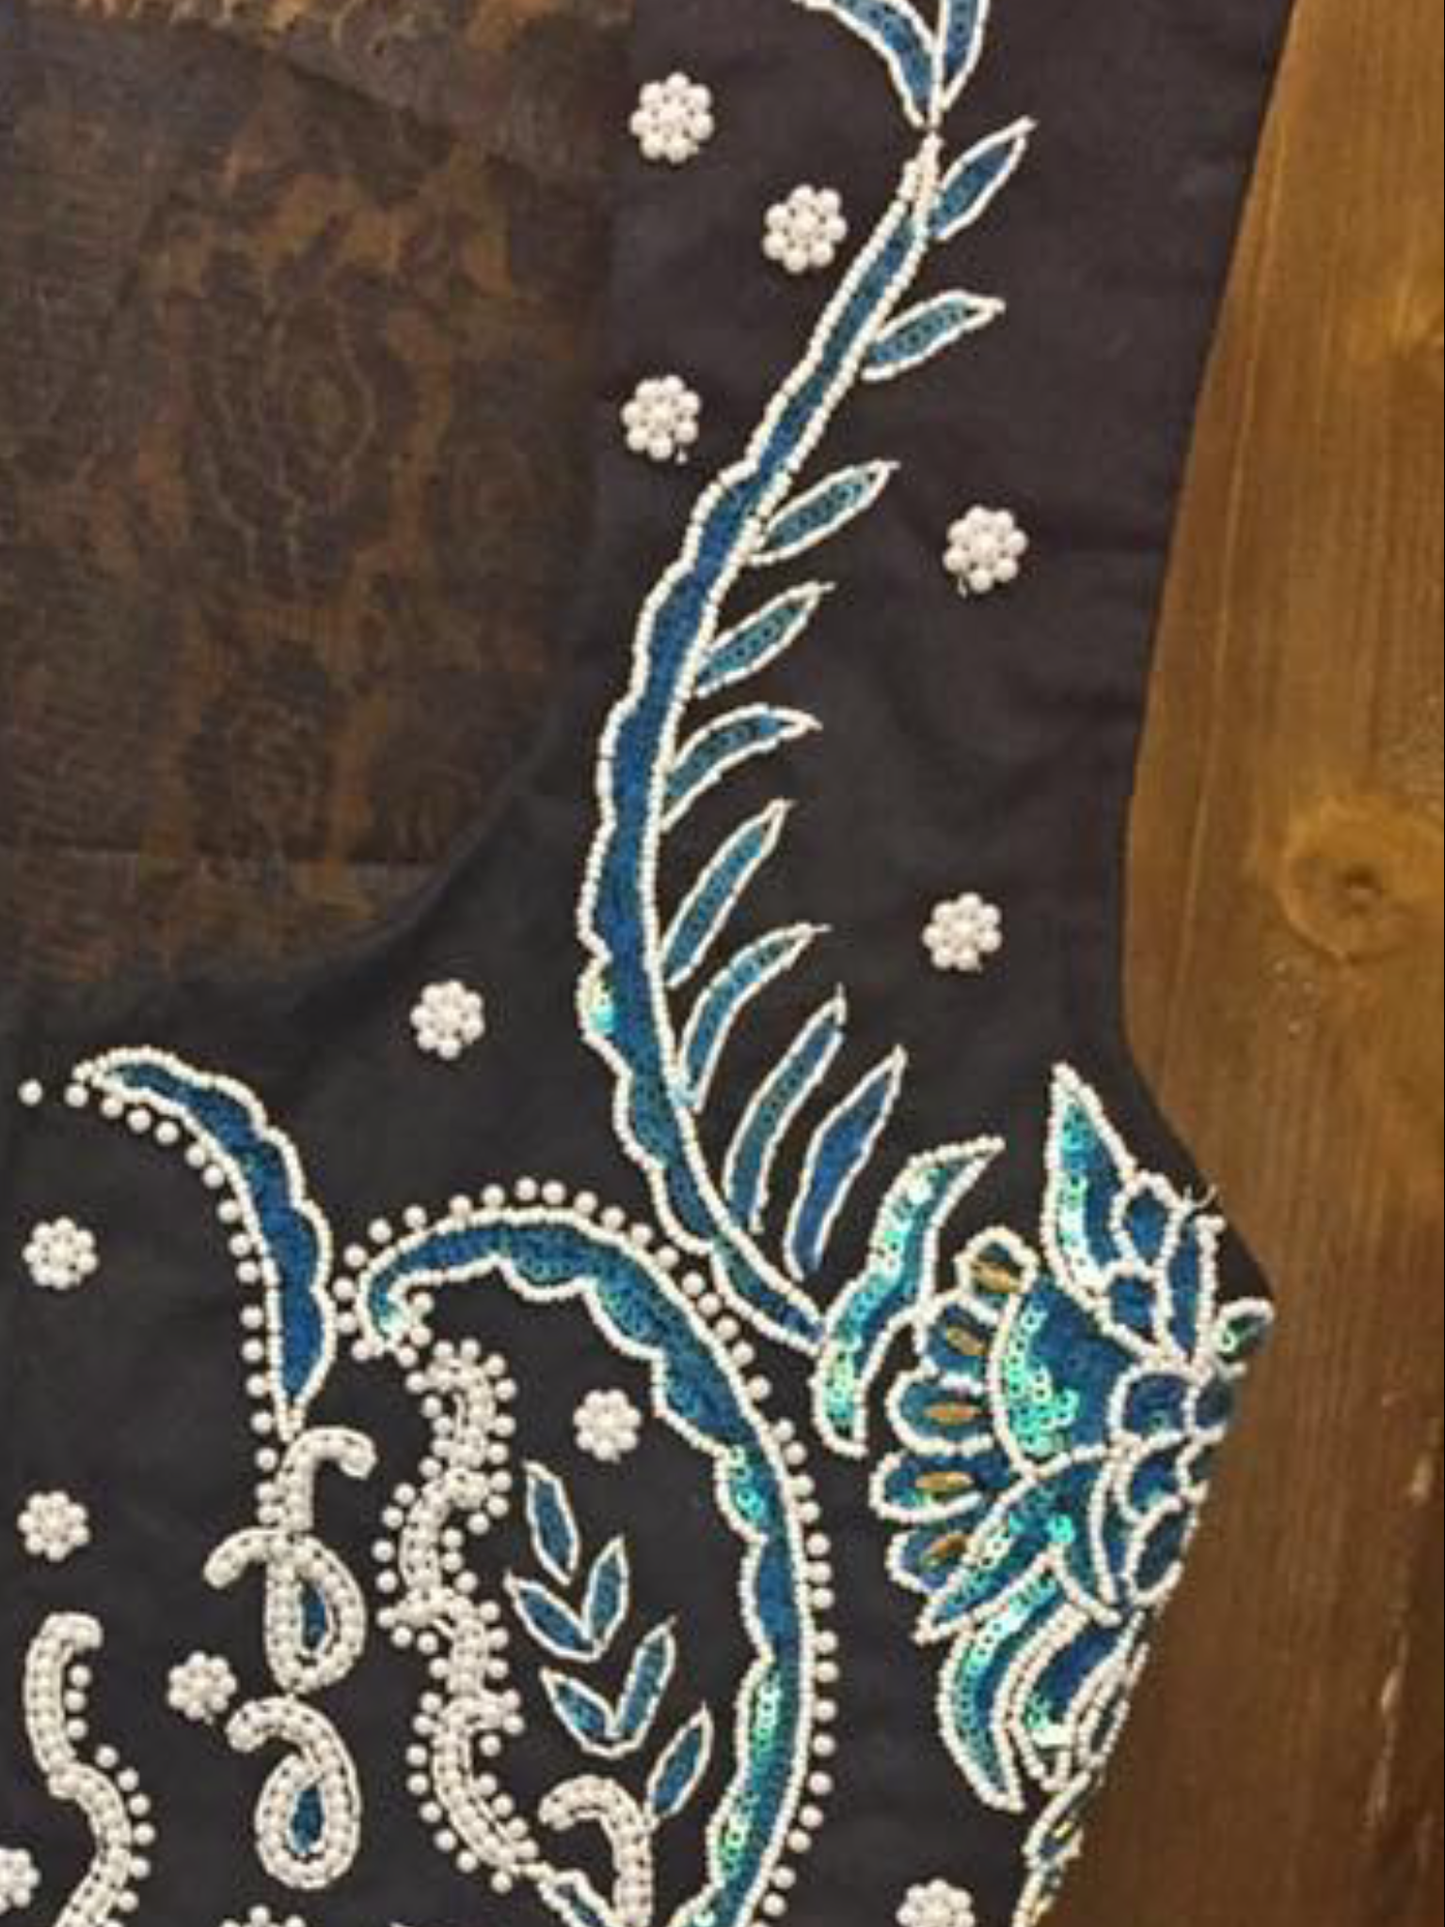 Turquoise Beaded Show Vest. Front Beading with Lace Back - Sparkling Cowgirl